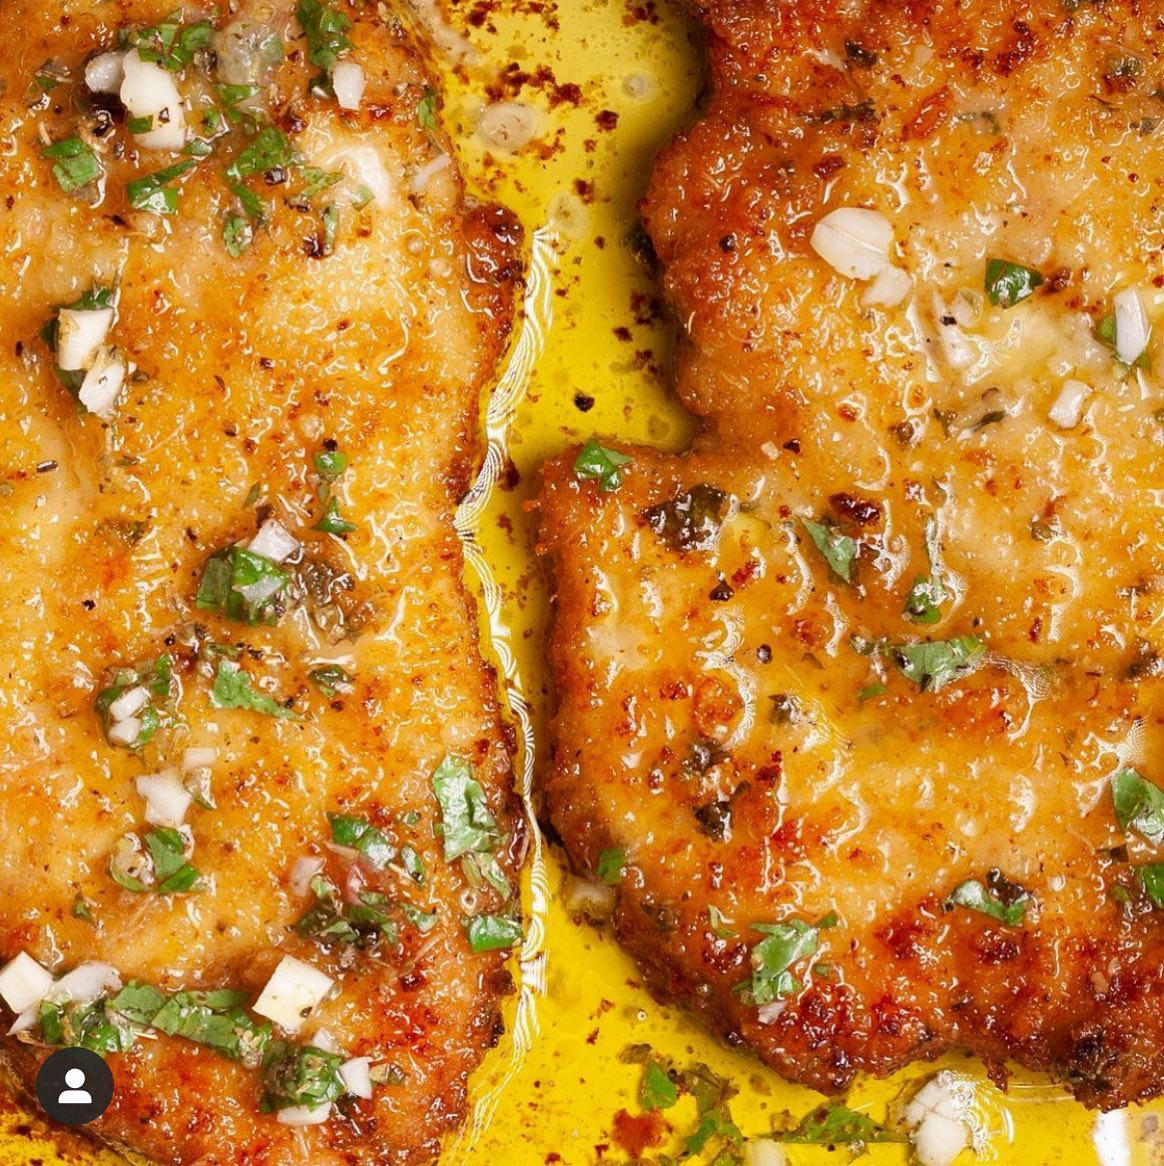 Official Foodie - brined n baked chicken cutlet